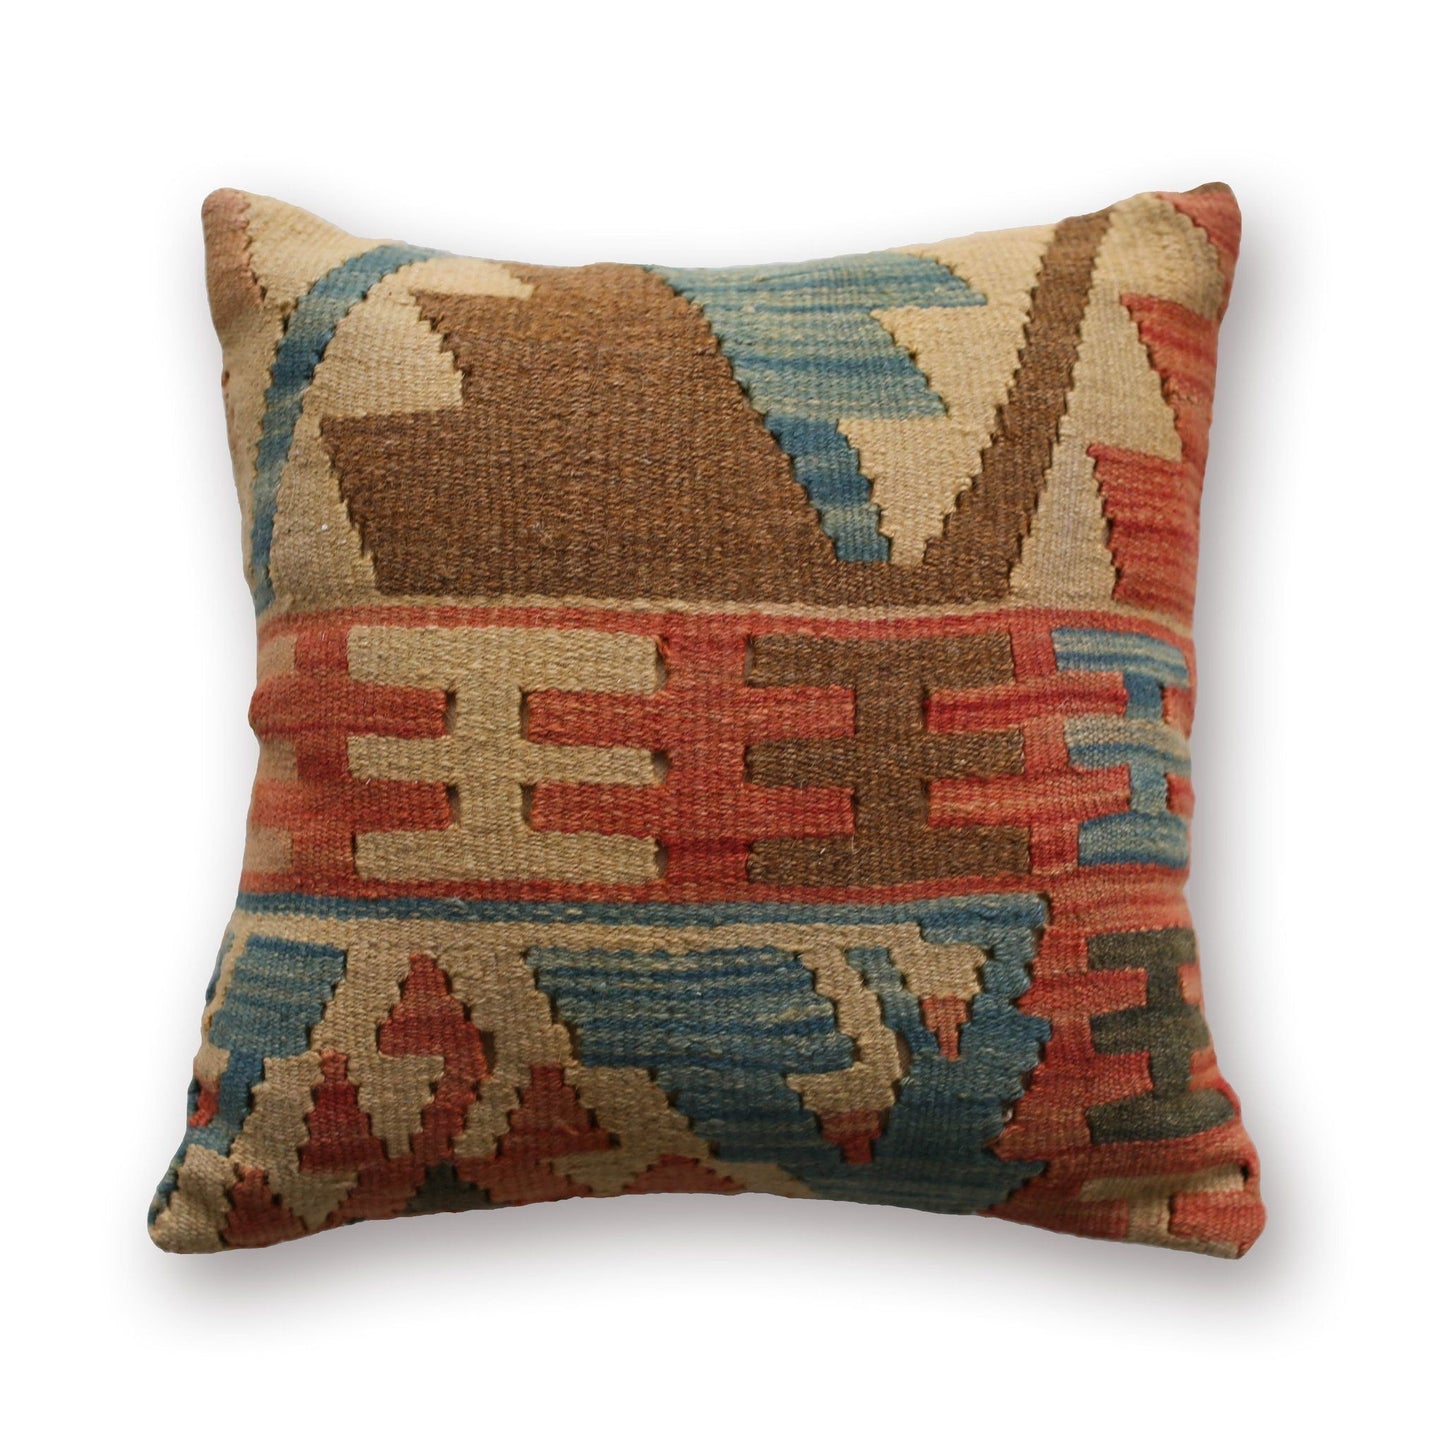 Kilim Pillow No. 04 - Canary Lane - Curated Textiles